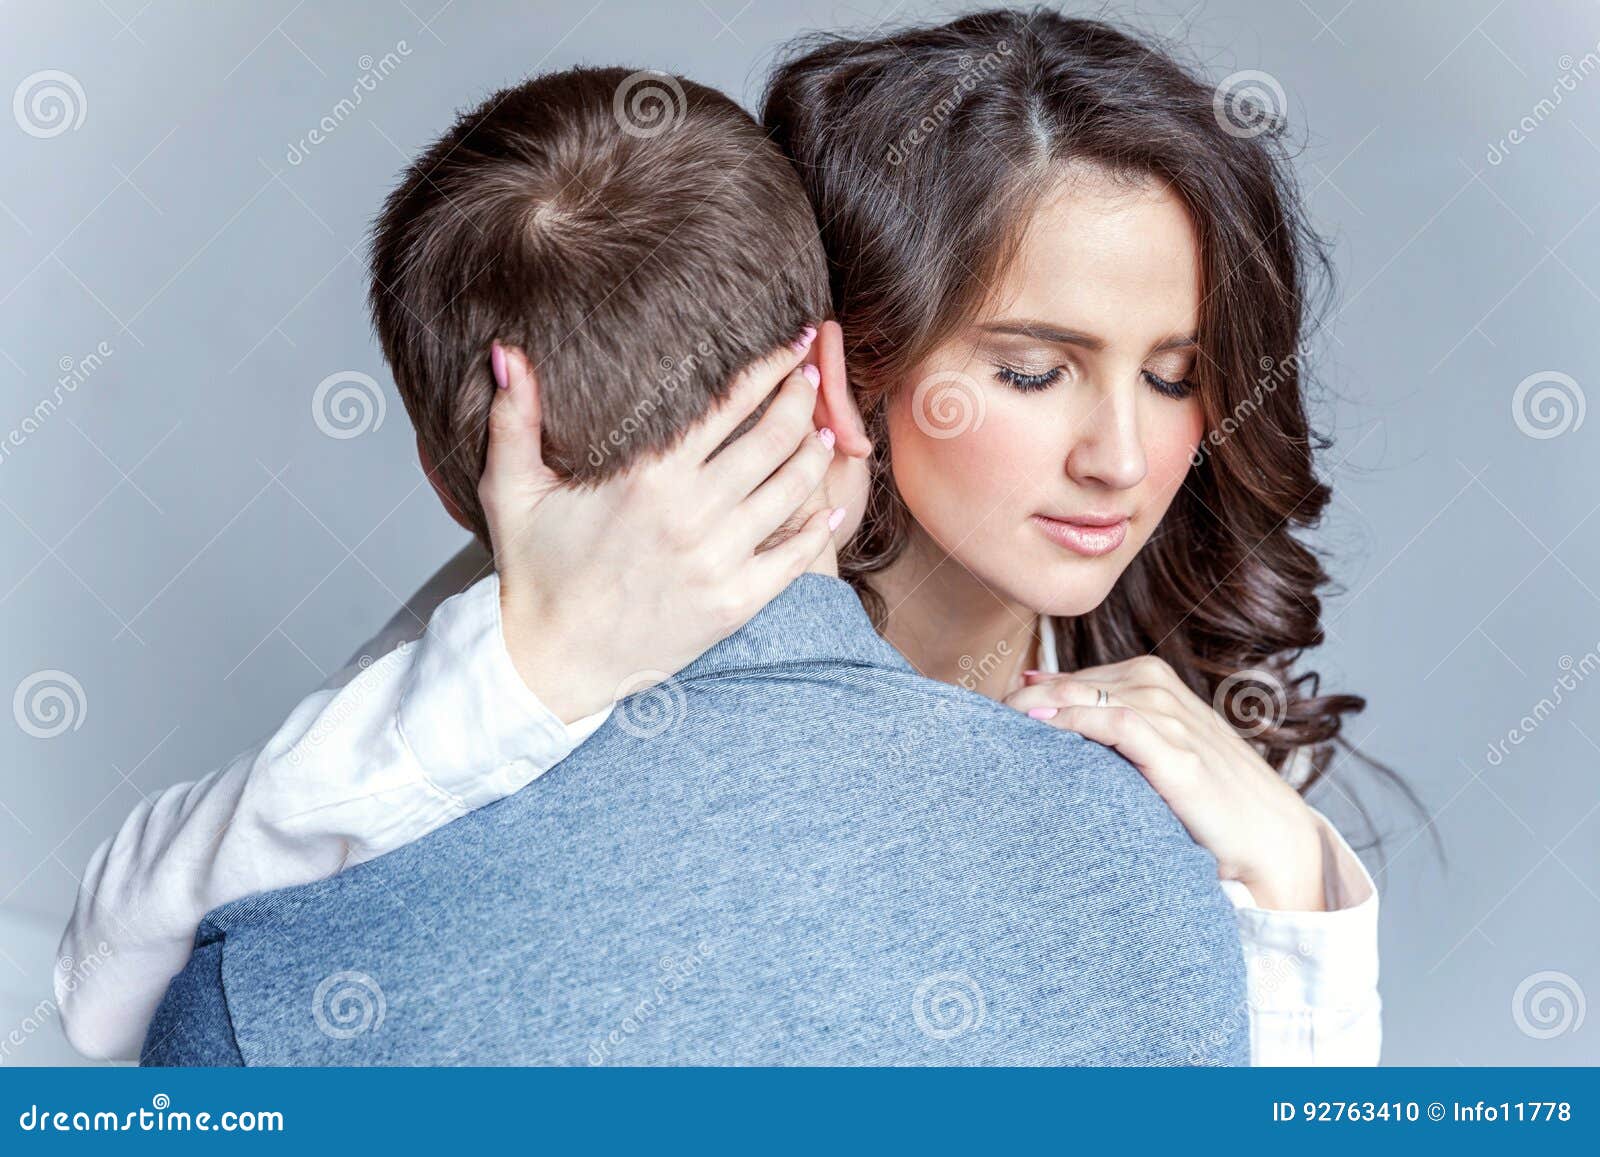 Young couple in love stock photo. Image of engagement - 92763410